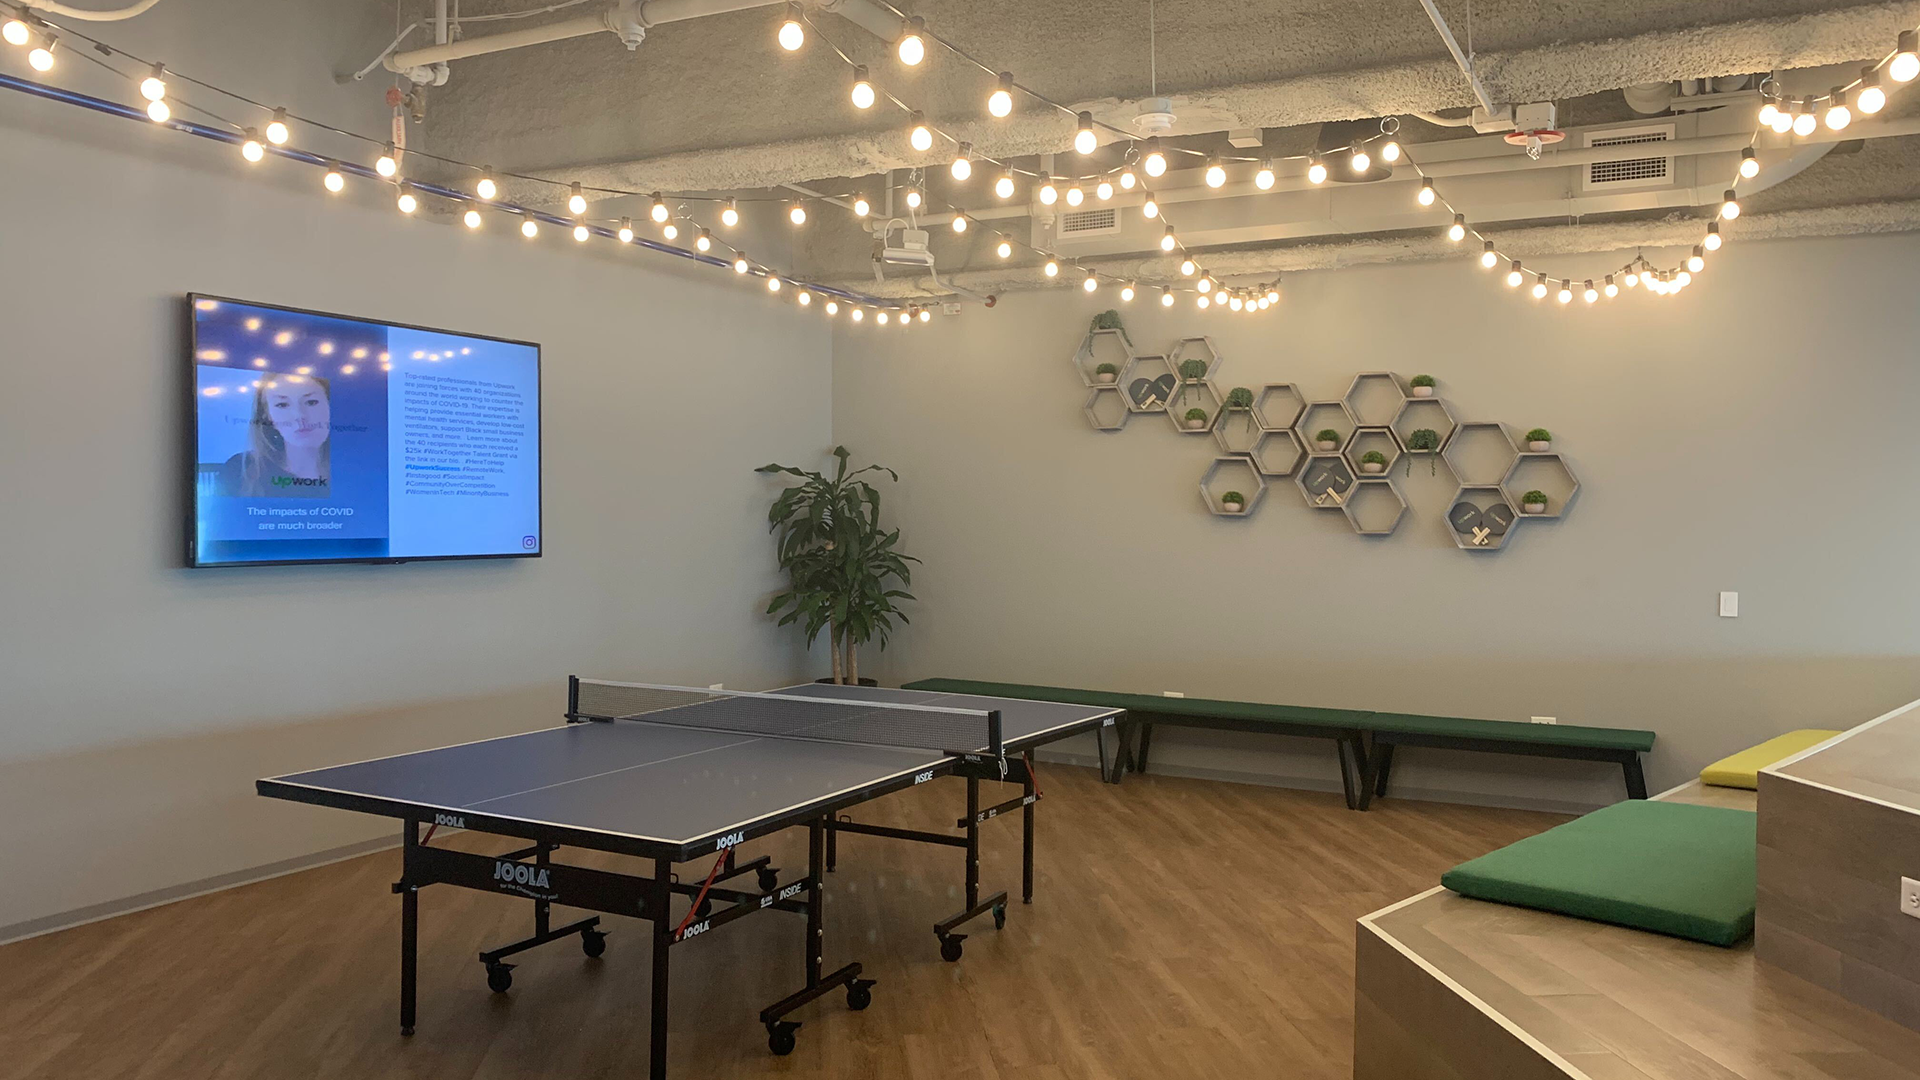 525 W Van Buren - Common area with added lights and ping pong table